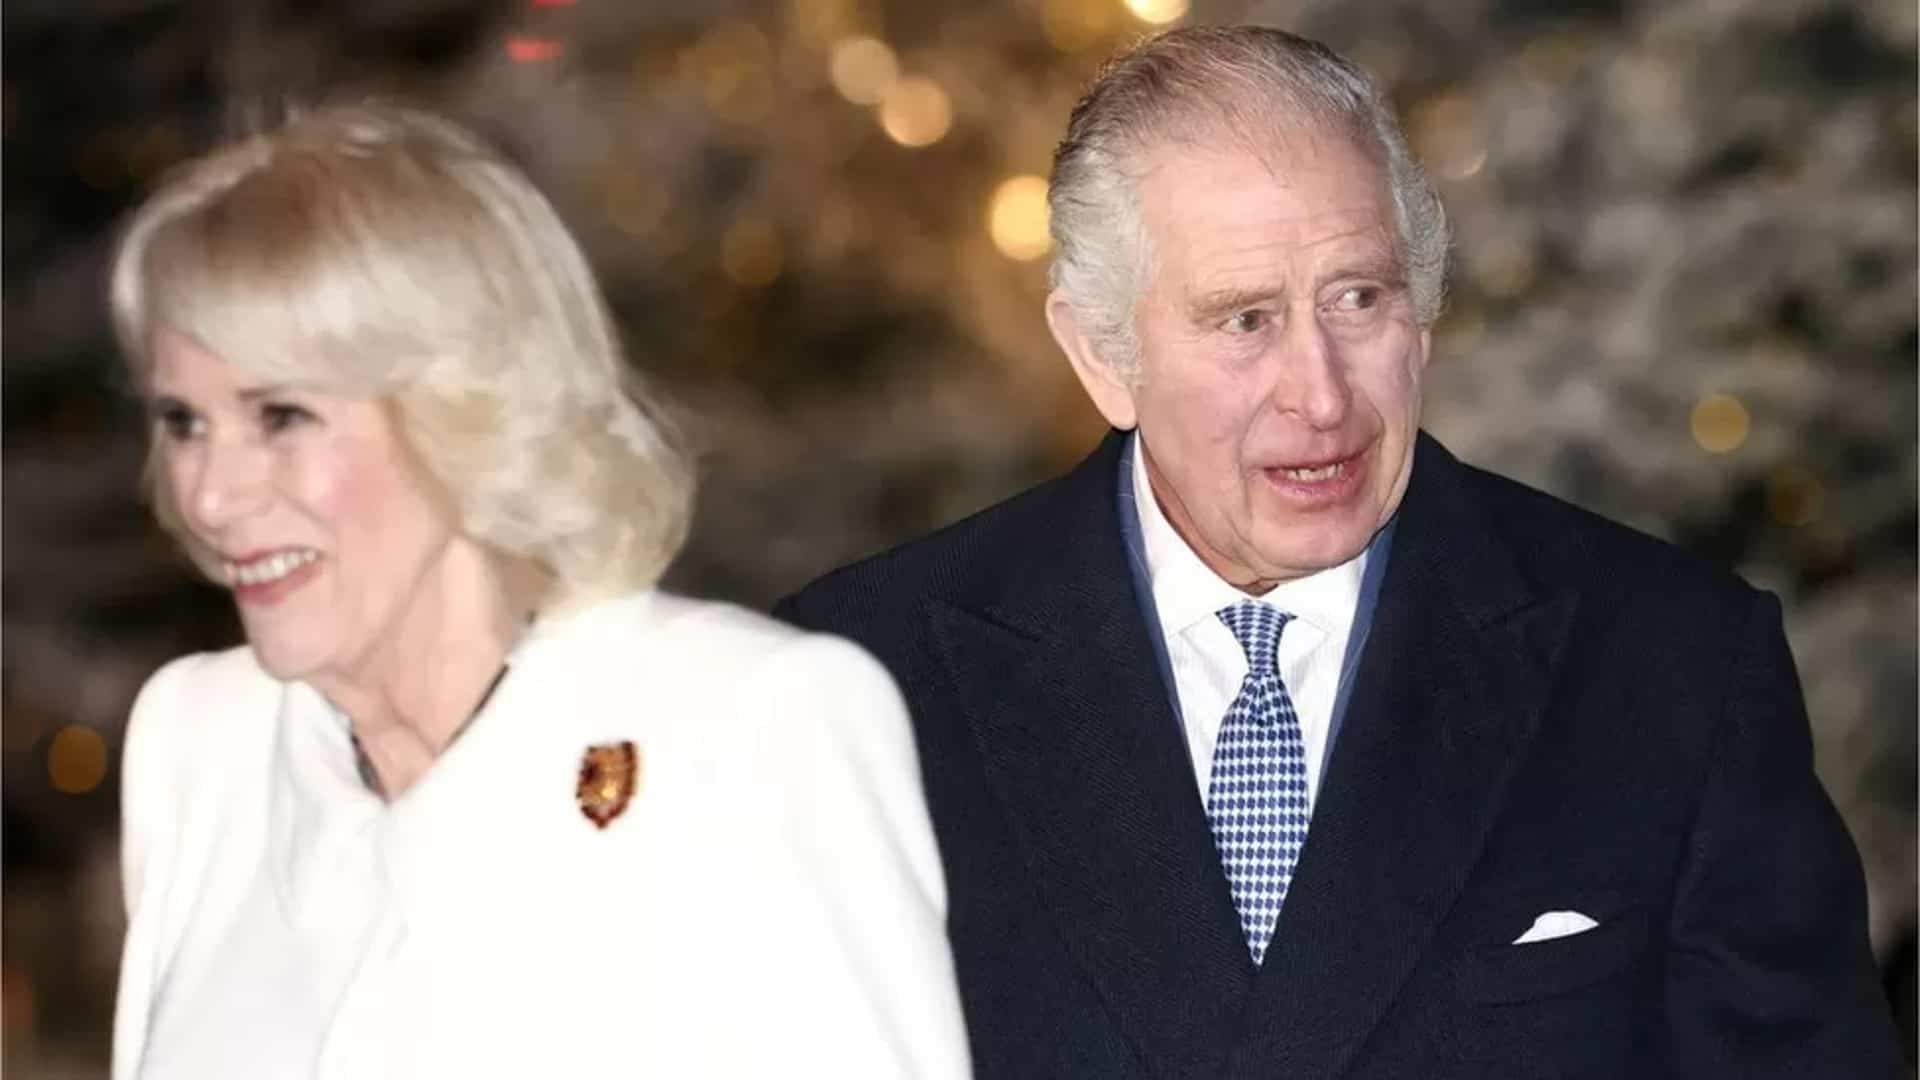 King Charles III and Camilla, the Queen Consort, at Sandringham